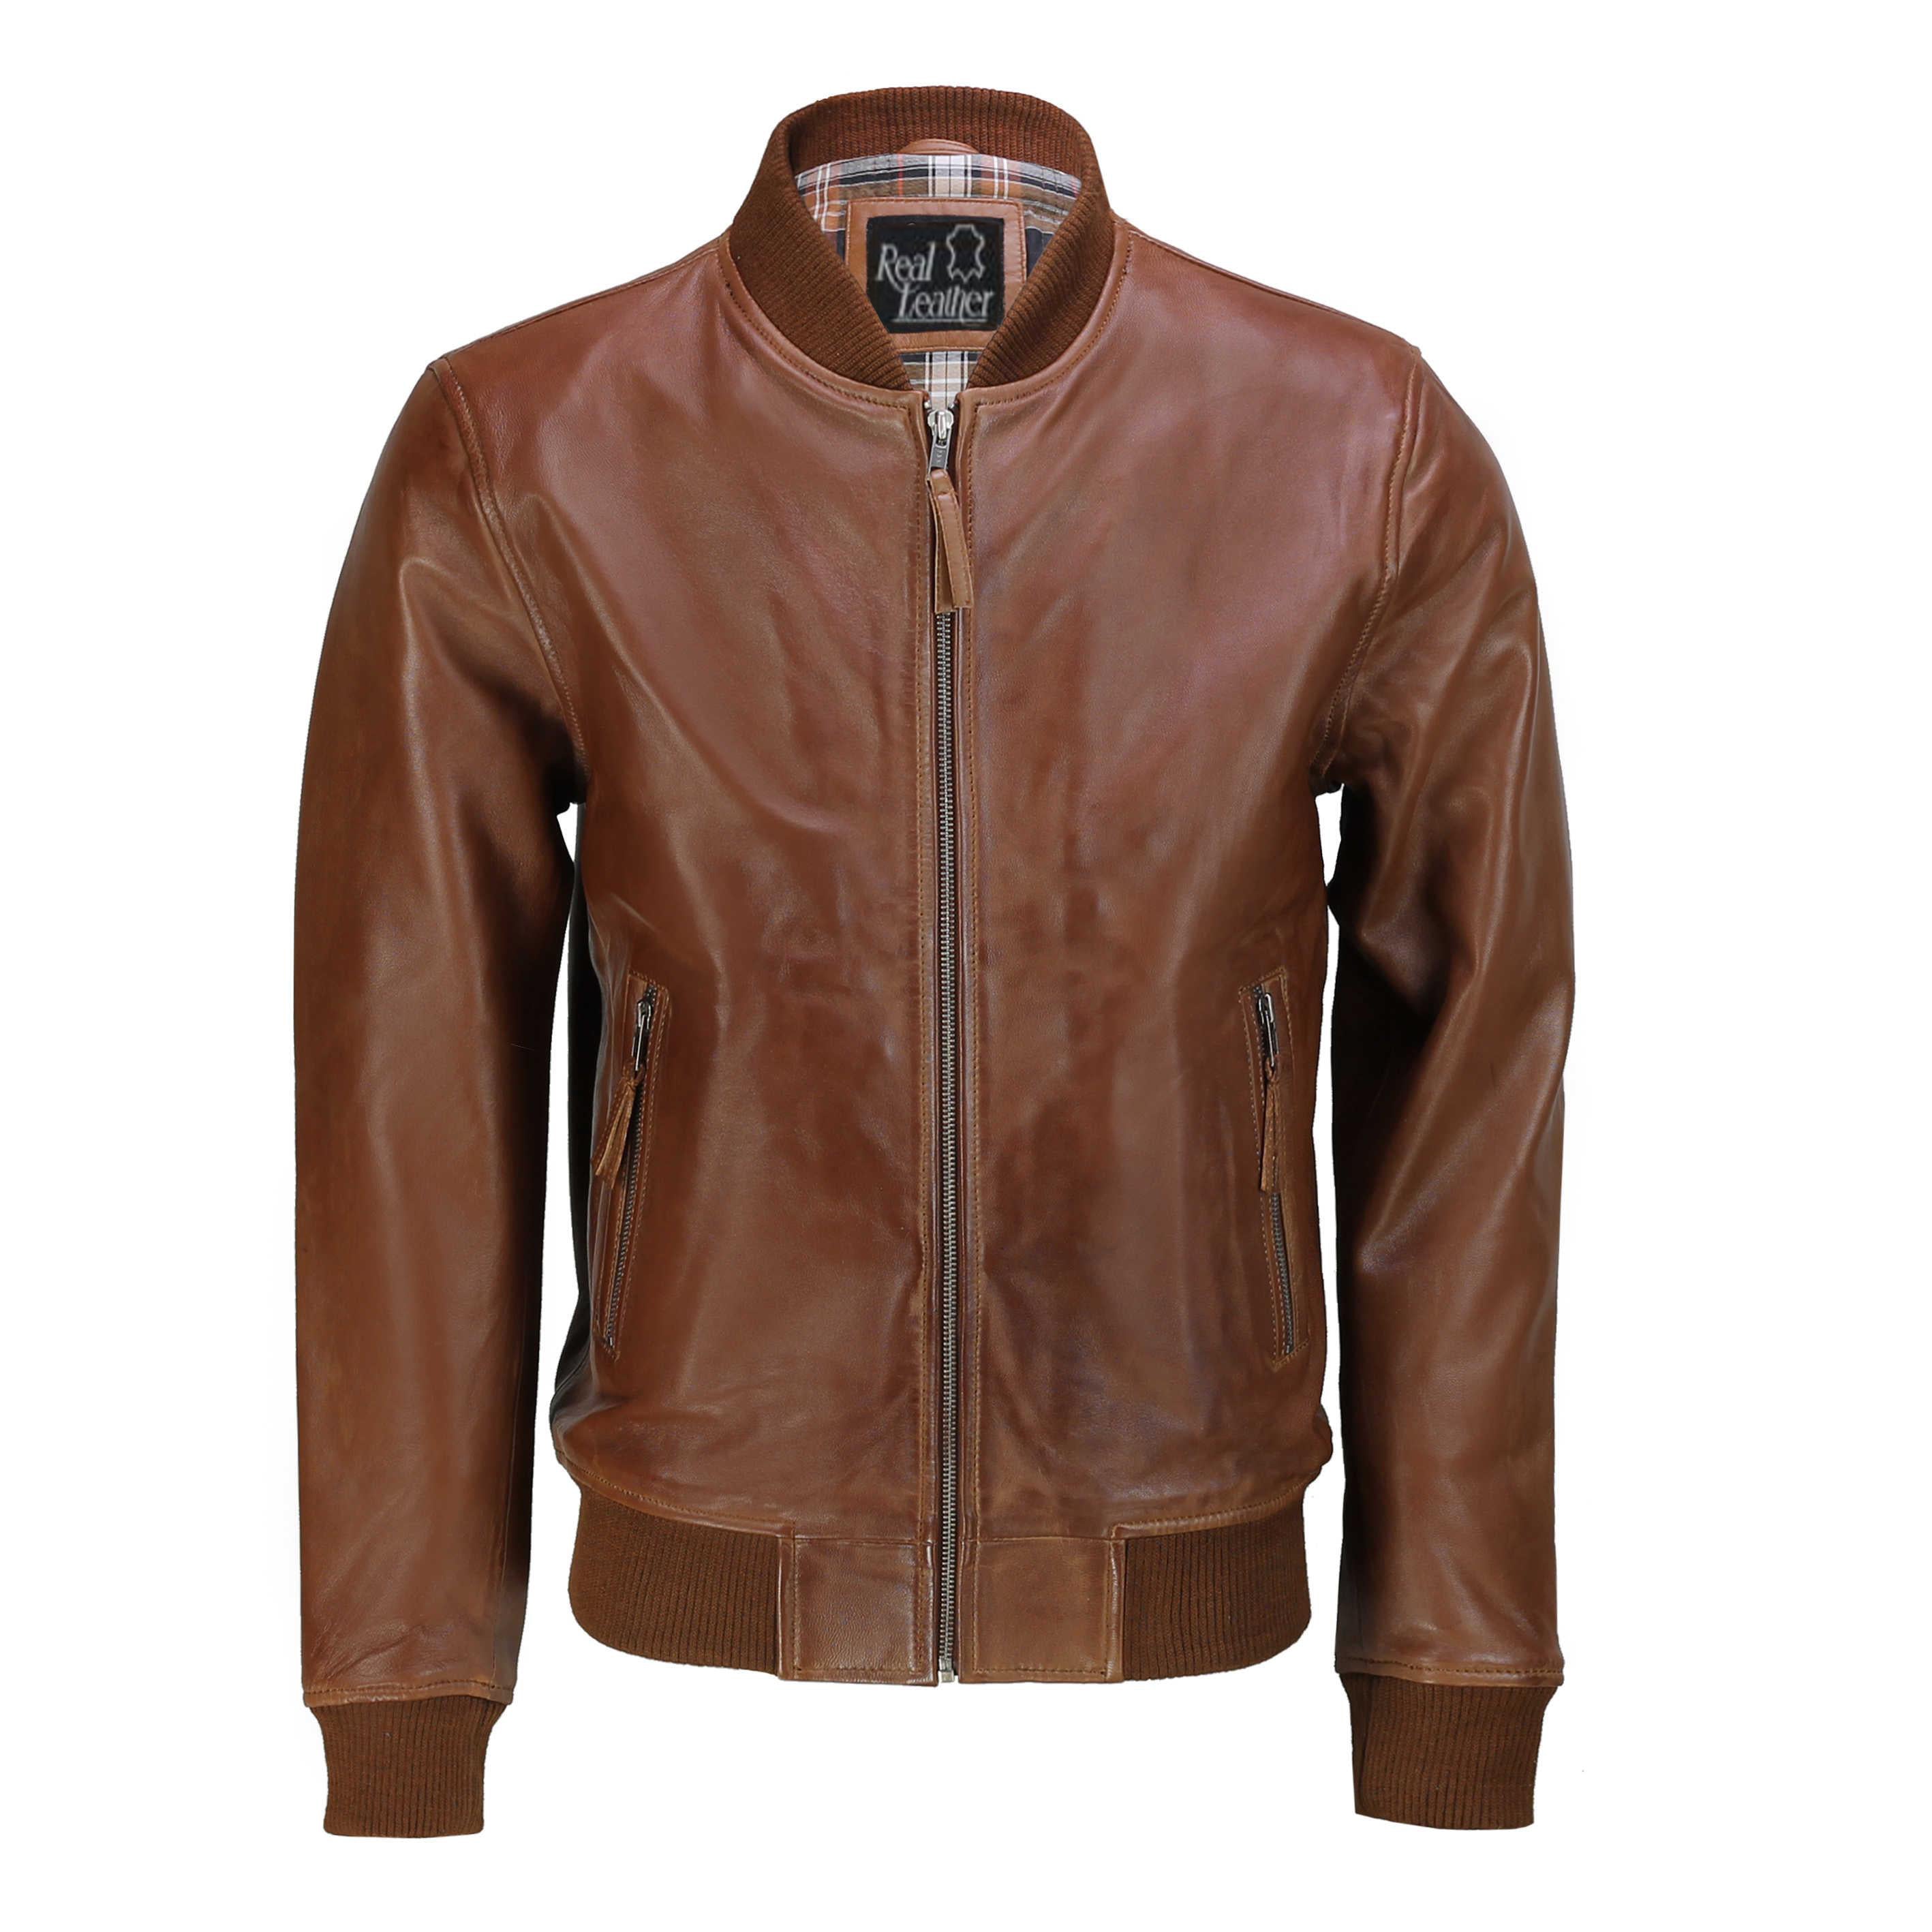 Xposed Mens Tan Black Soft Real Leather Smart Casual Vintage Bomber Biker Style Jacket